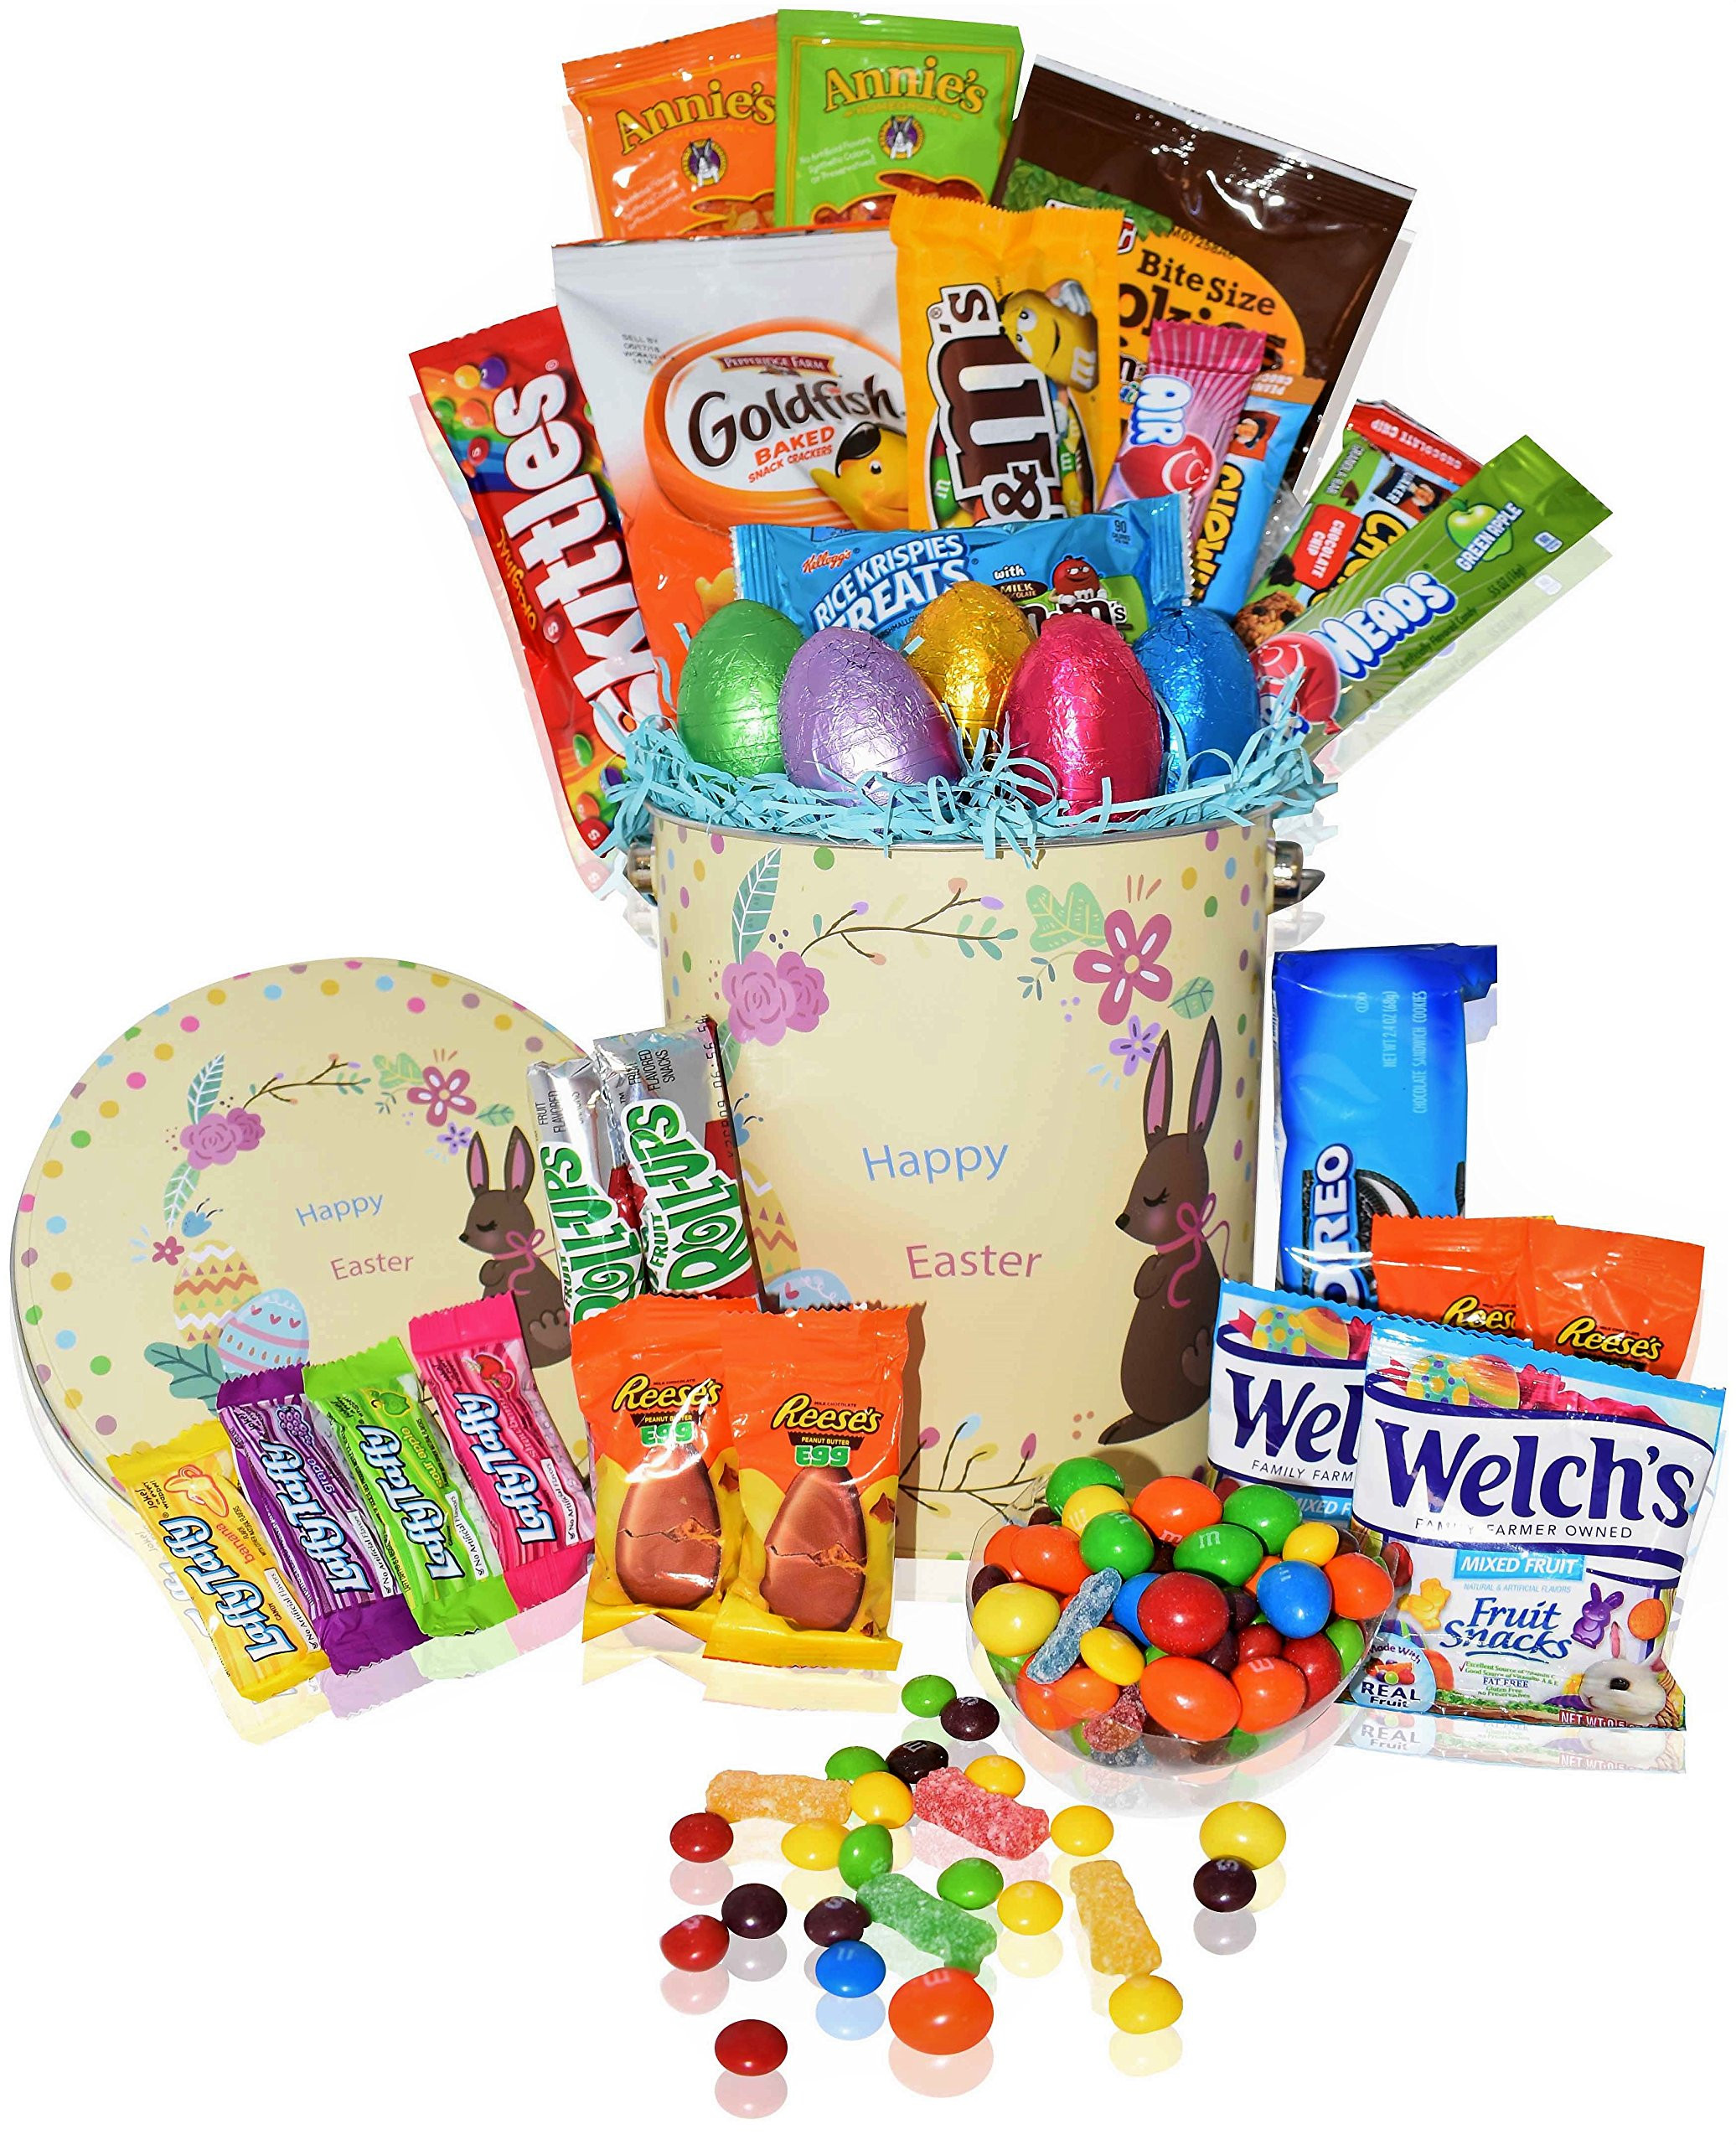 Good Easter Gifts
 Best Easter Gifts For Tweens Easter Basket Ideas for